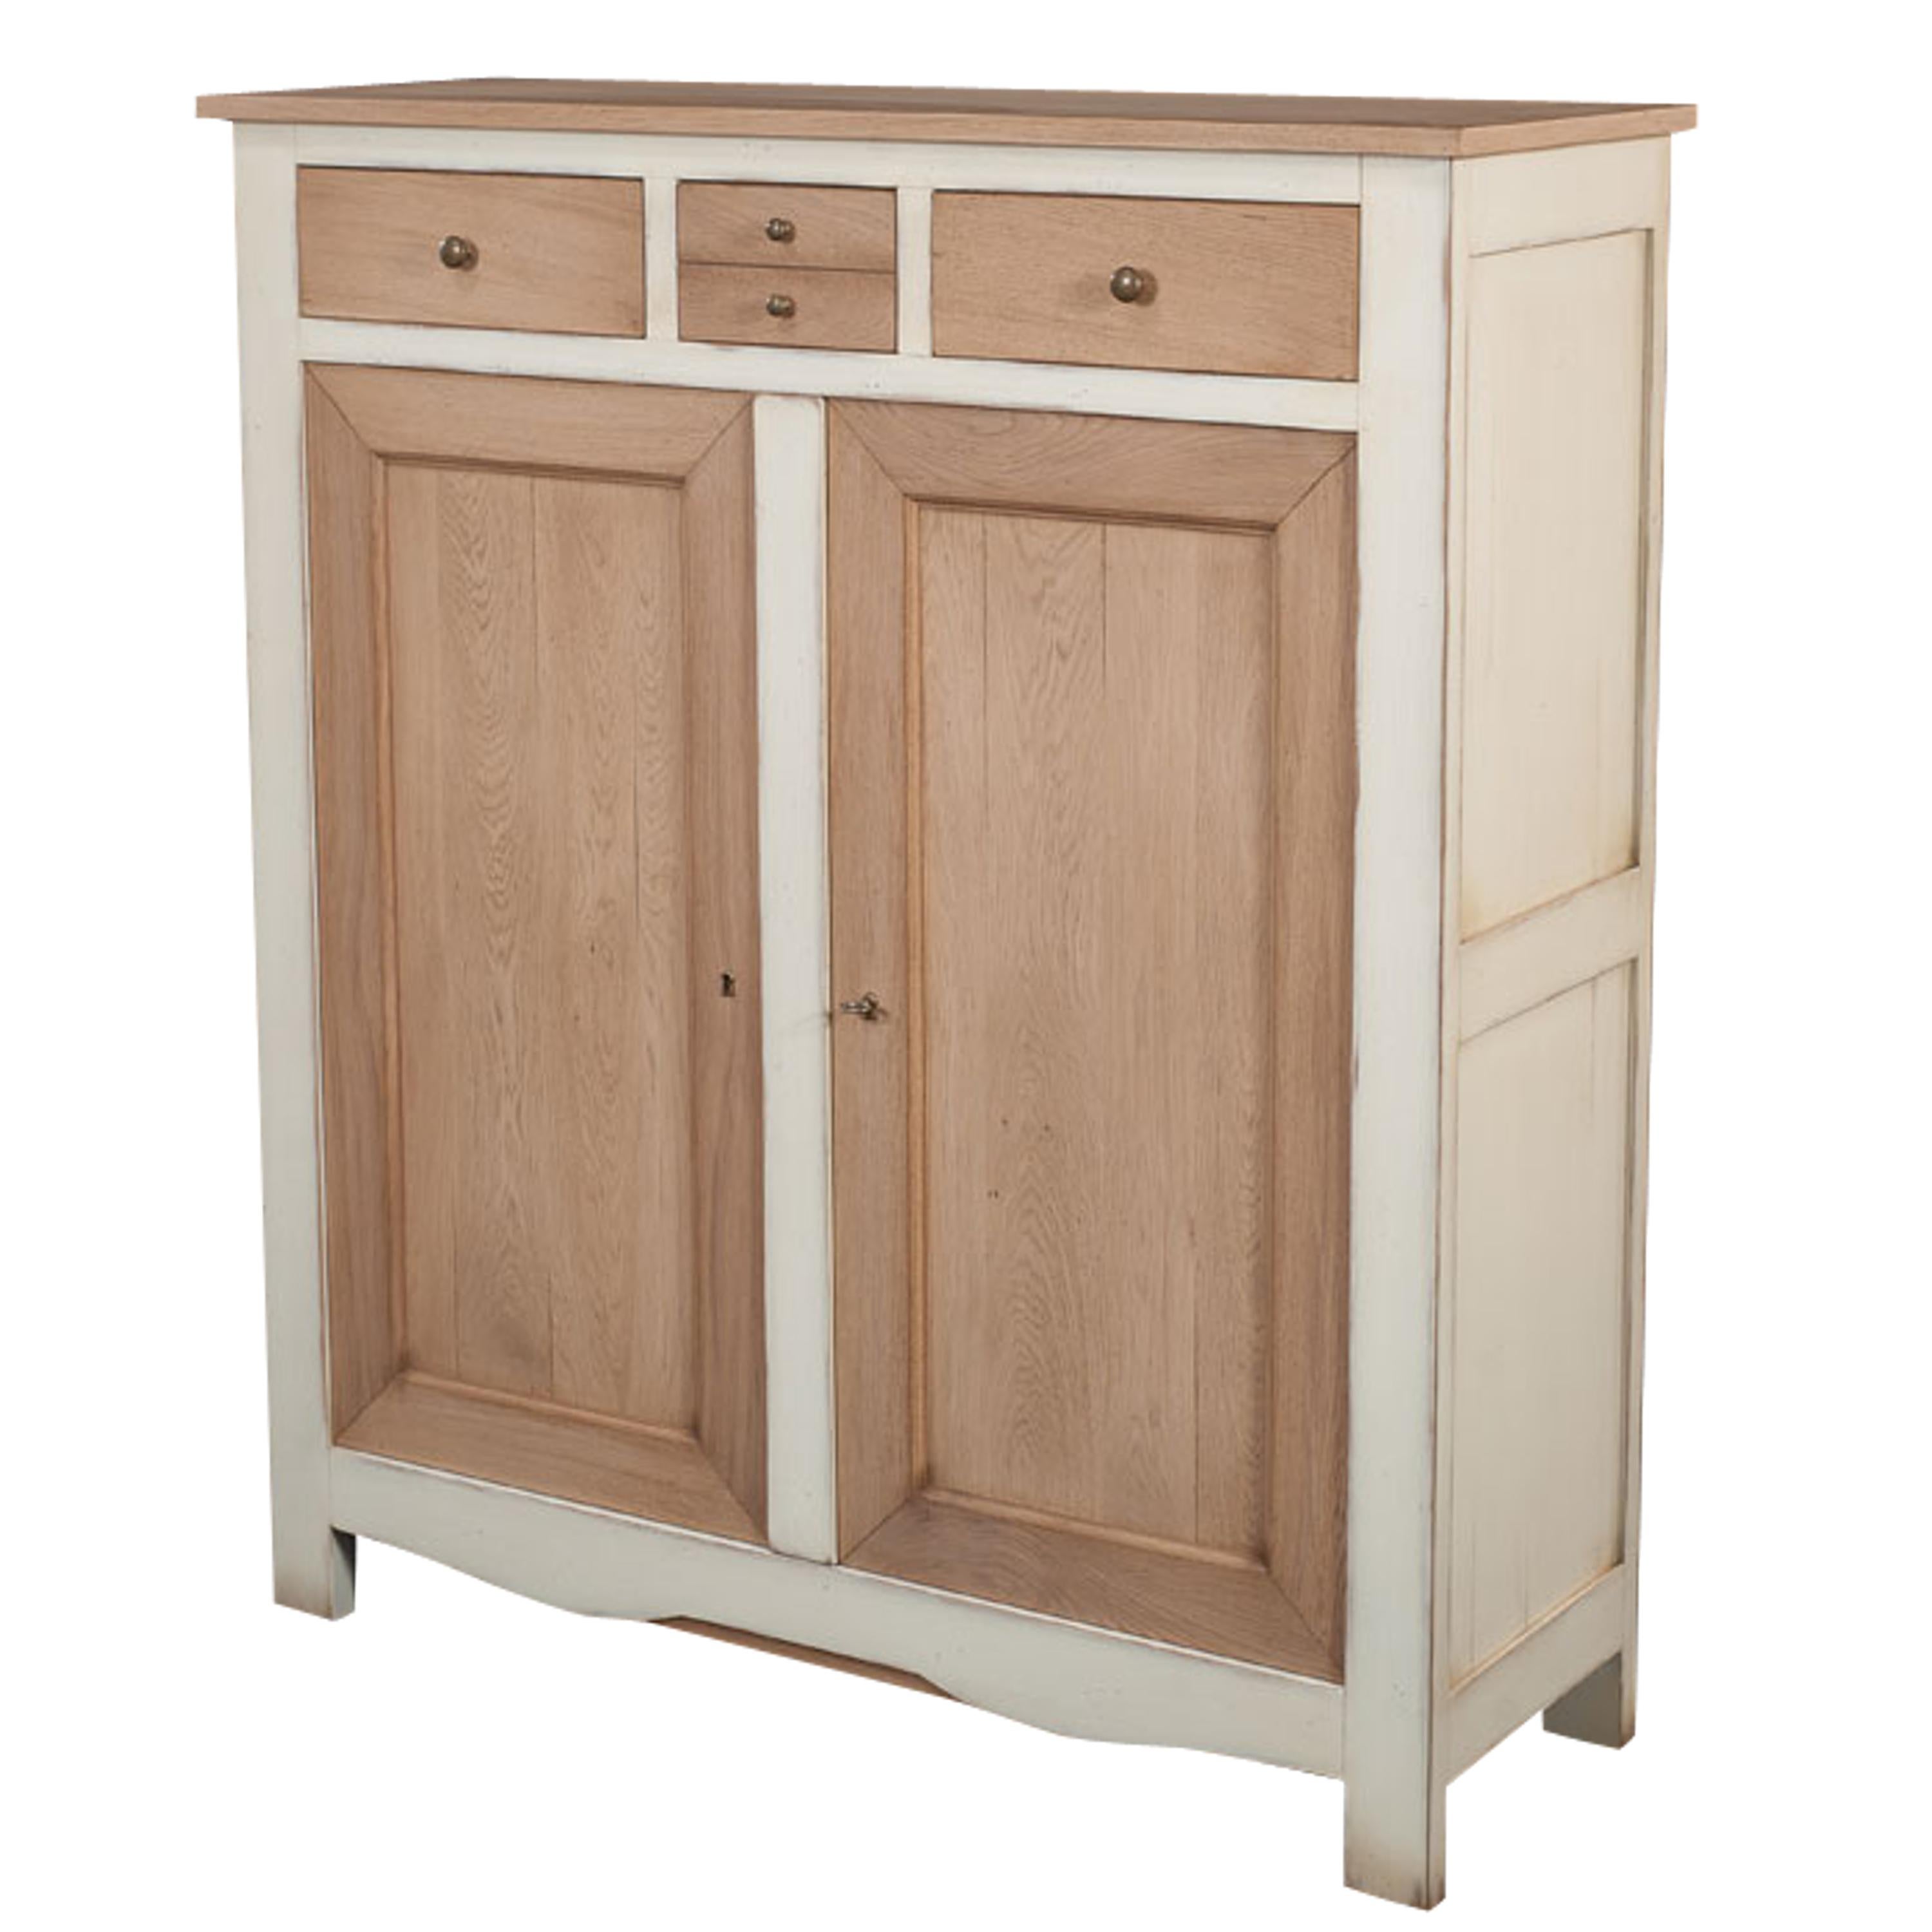 This Cabinet is a handcrafted typical French Countryside style. It is a 100% made in France with French solid oak.

This neat, white cream lacquered and chestnut stained cabinet features 3 drawers, 2 doors, a working lock and key and 3 oak inside